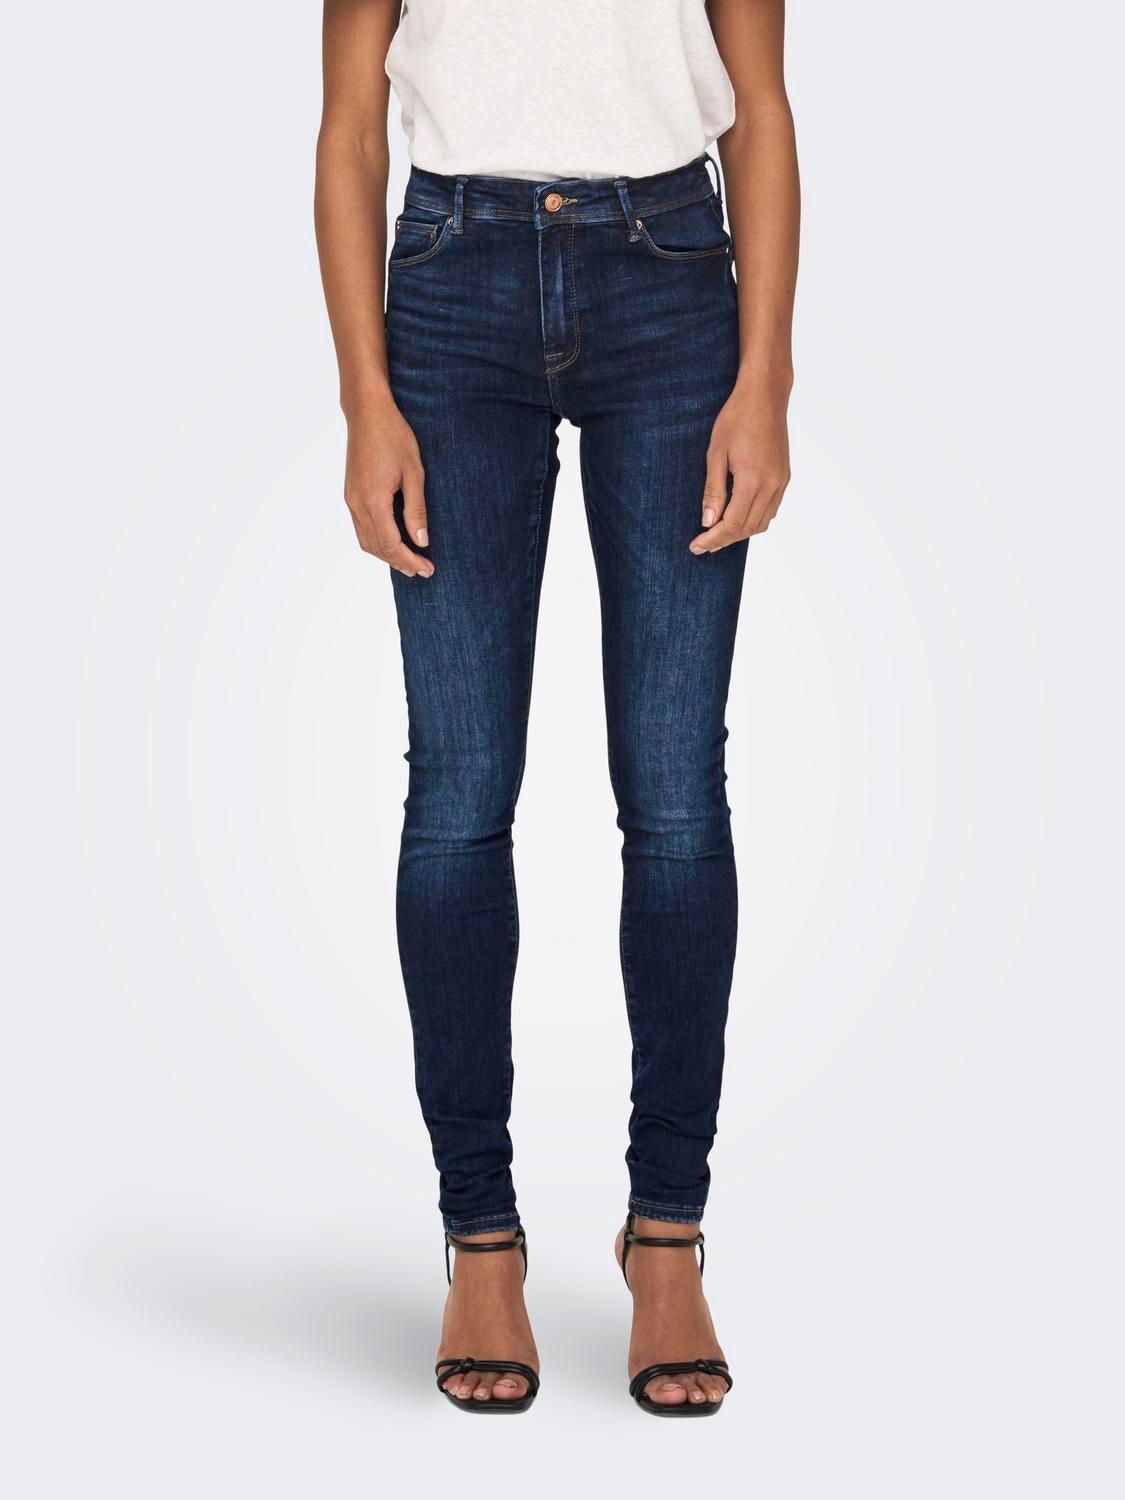 ONLY Jeans Skinny Fit Taille classique -Dark Blue Denim - 15235035